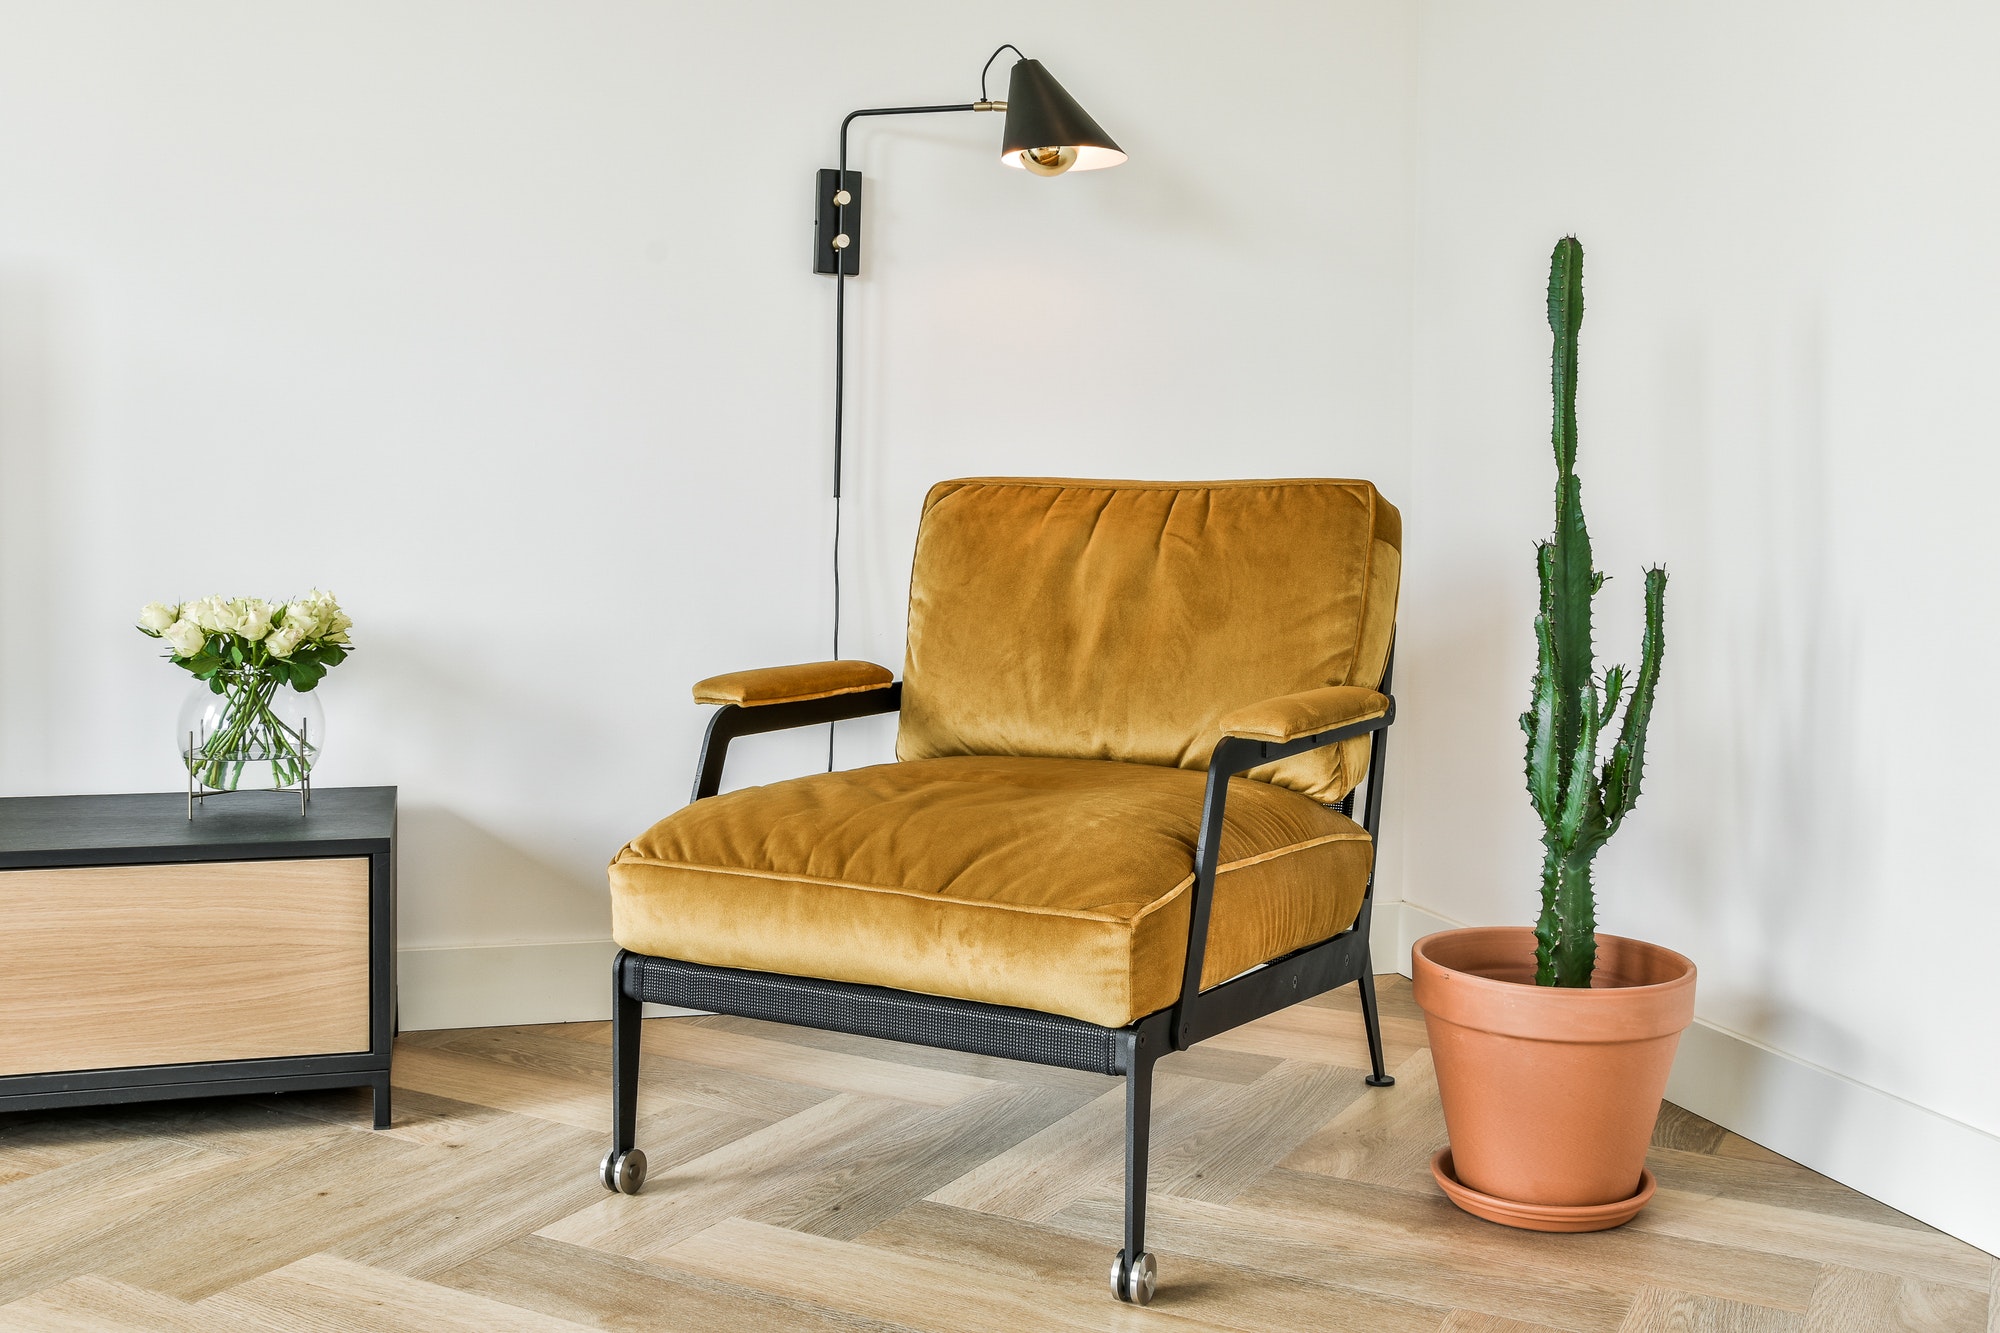 Armchair, lamp, and cactus in a room